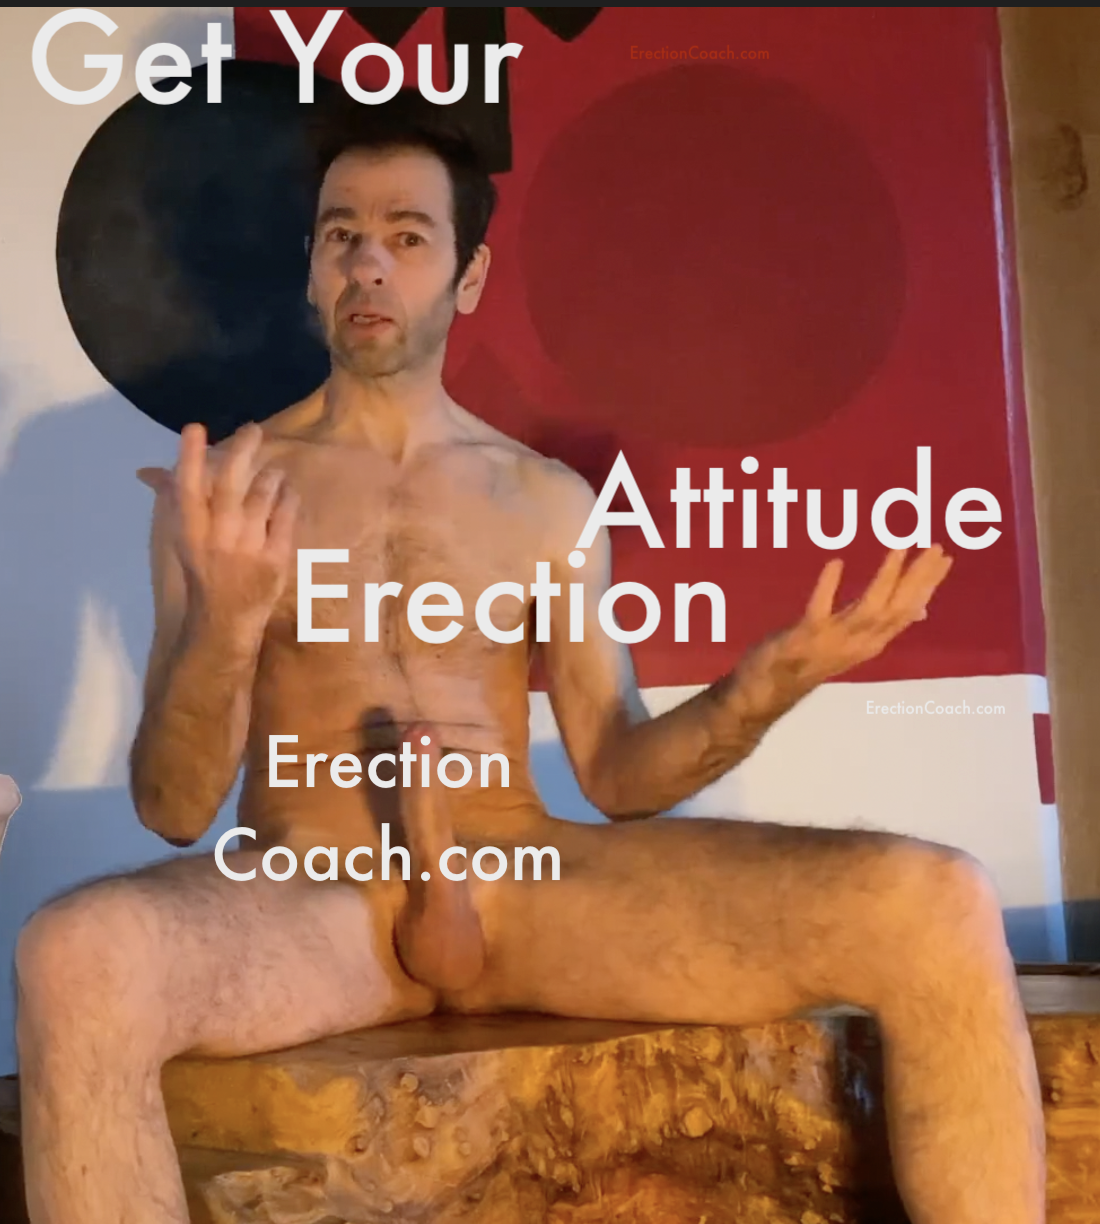 naked man sitting down with legs wide to show his erection pointing up, partly obscured with text saying erection coach